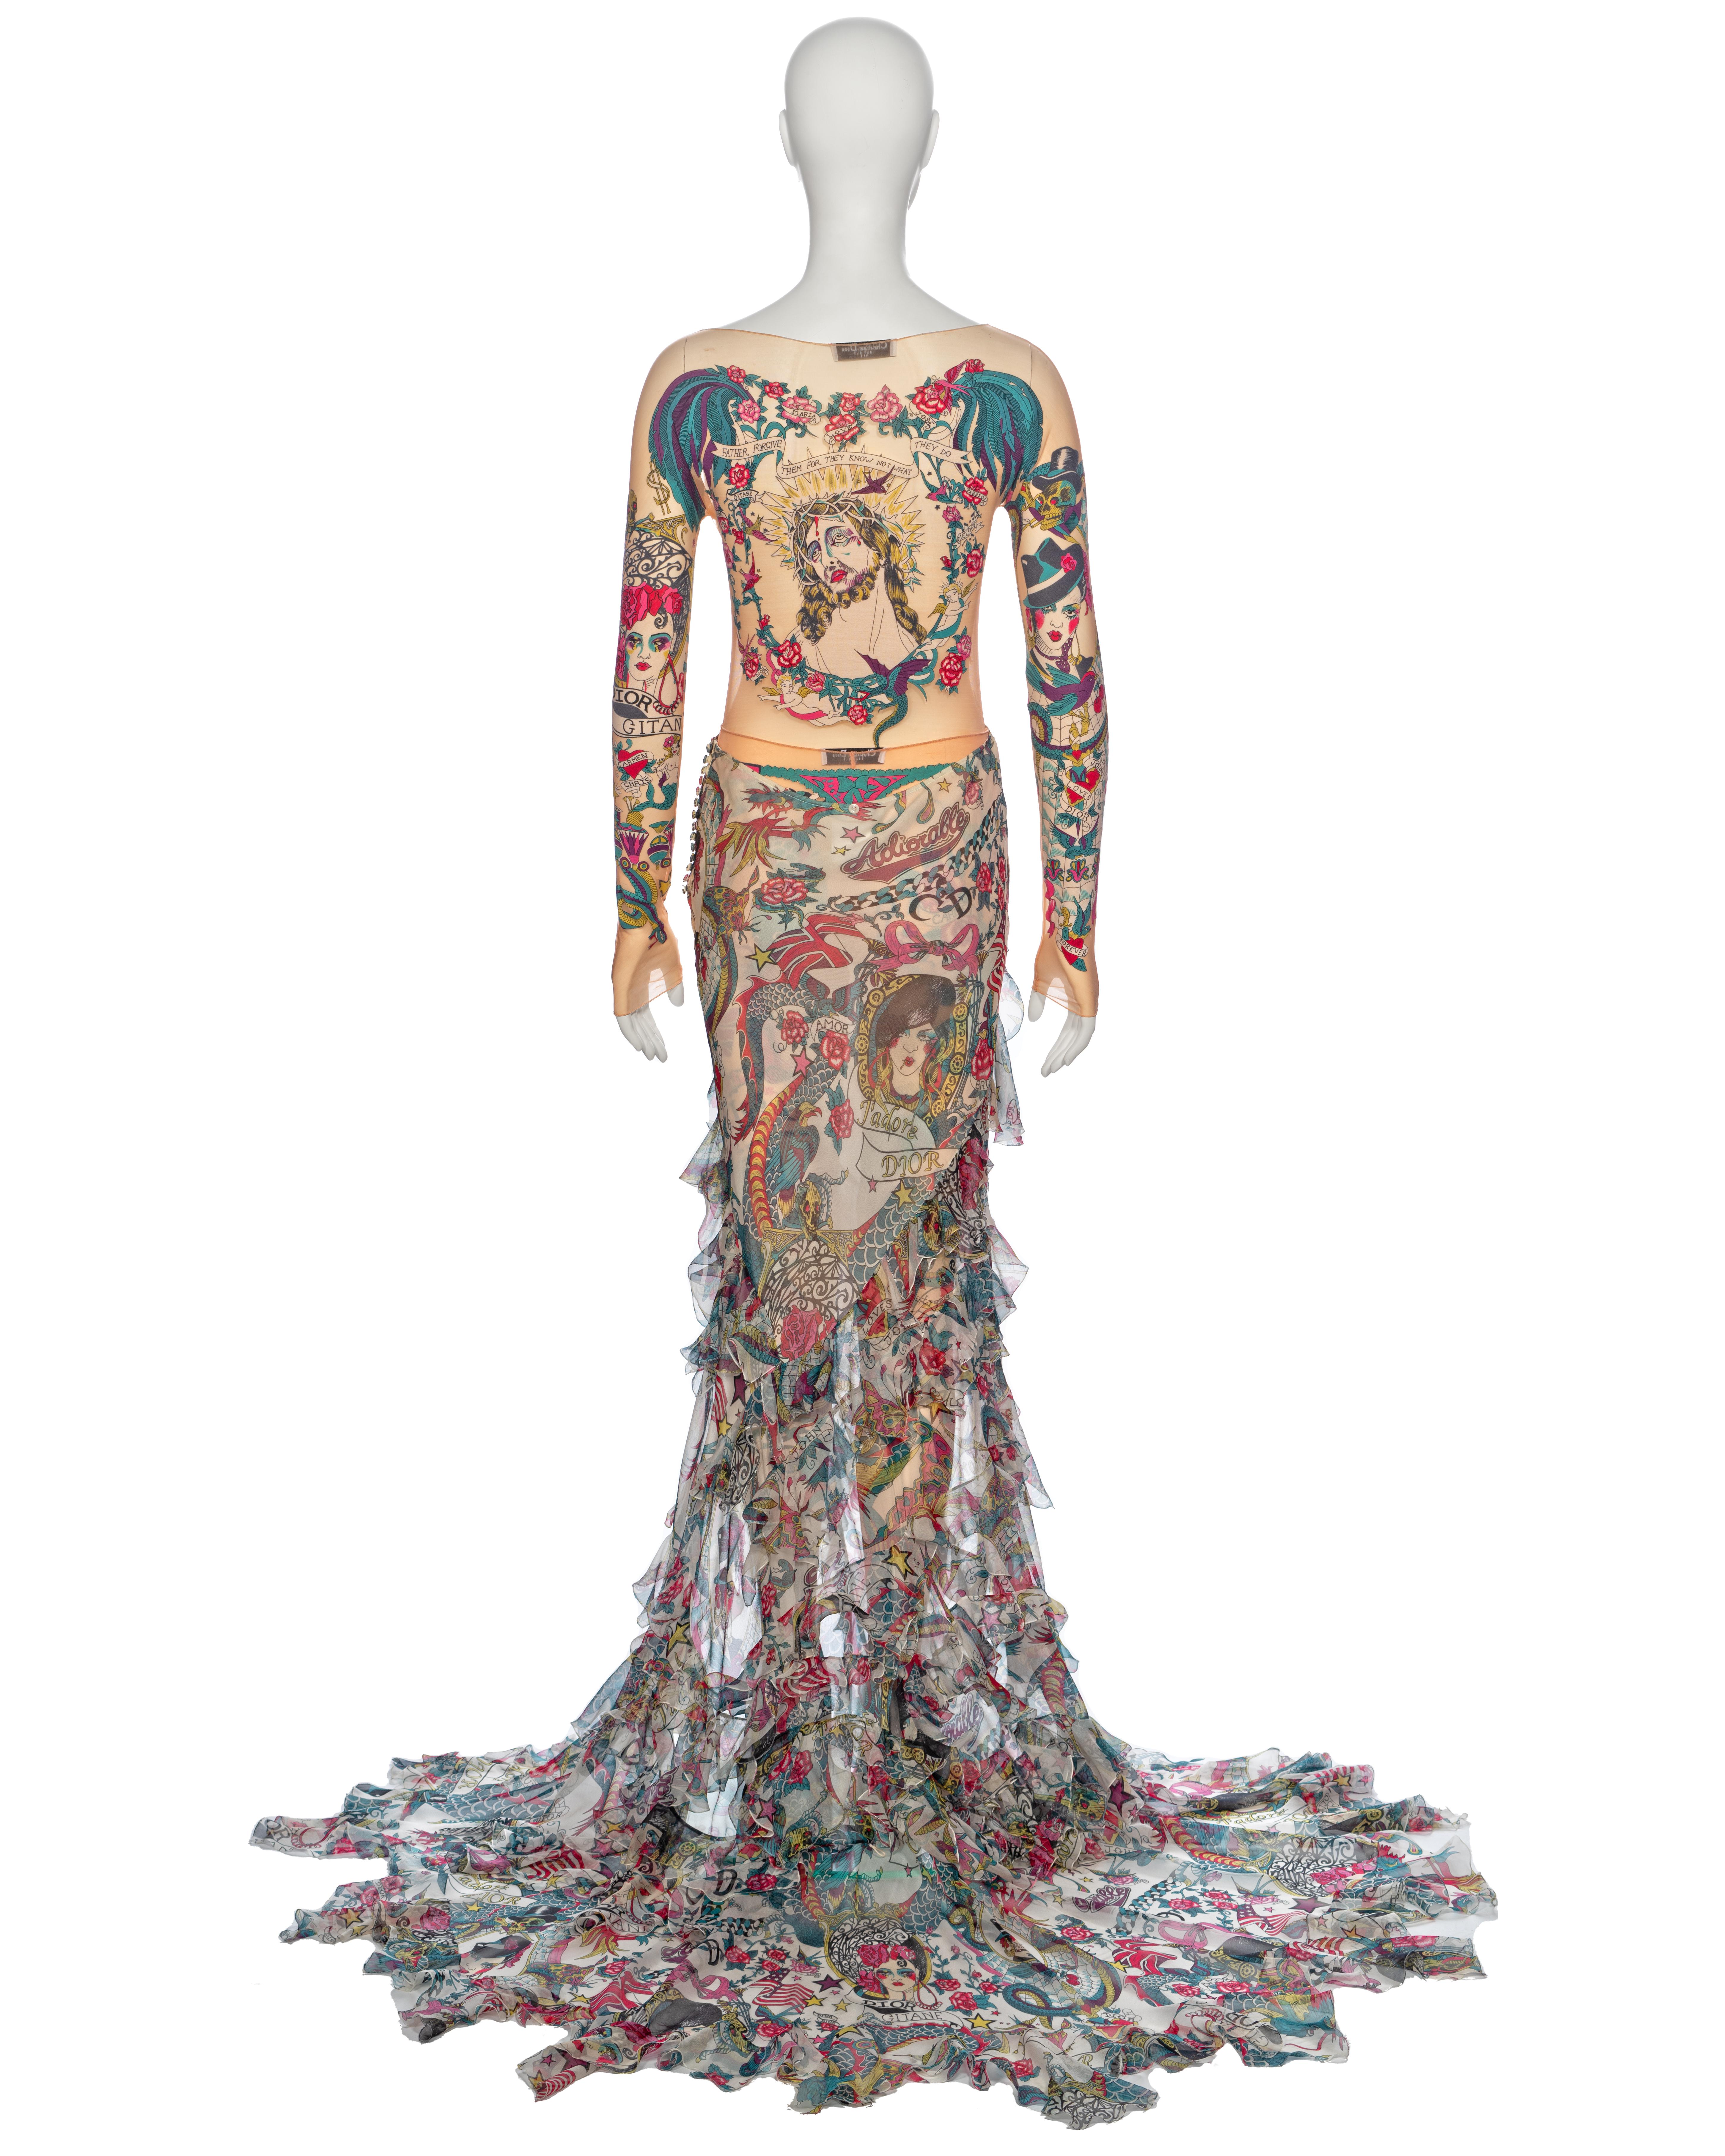 Christian Dior by John Galliano Tattoo Print Body, Leggings and Skirt, ss 2004 For Sale 11